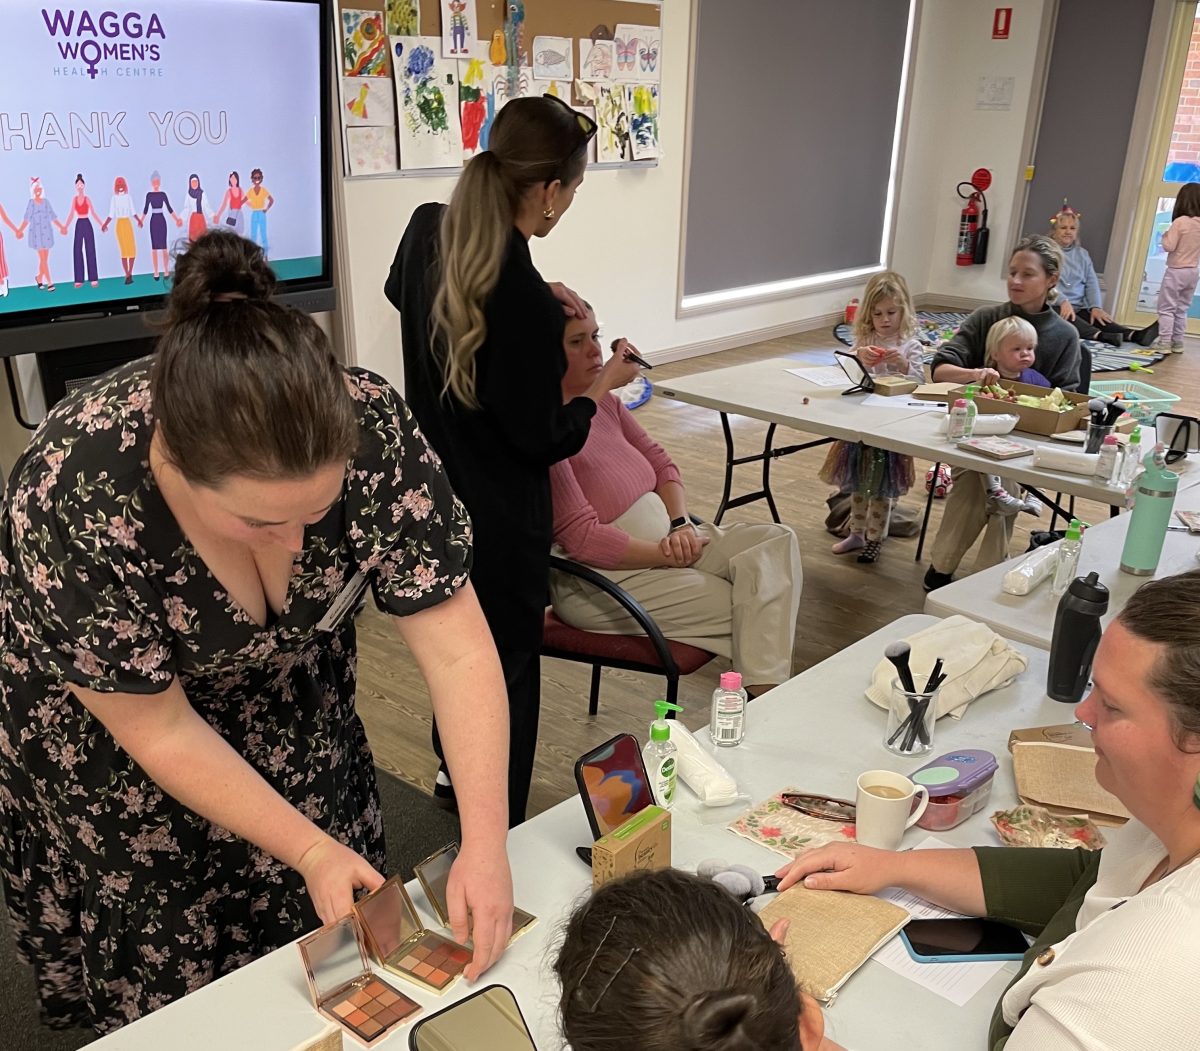 The team from the Wagga Women's Health Centre hosted a self-care workshop.